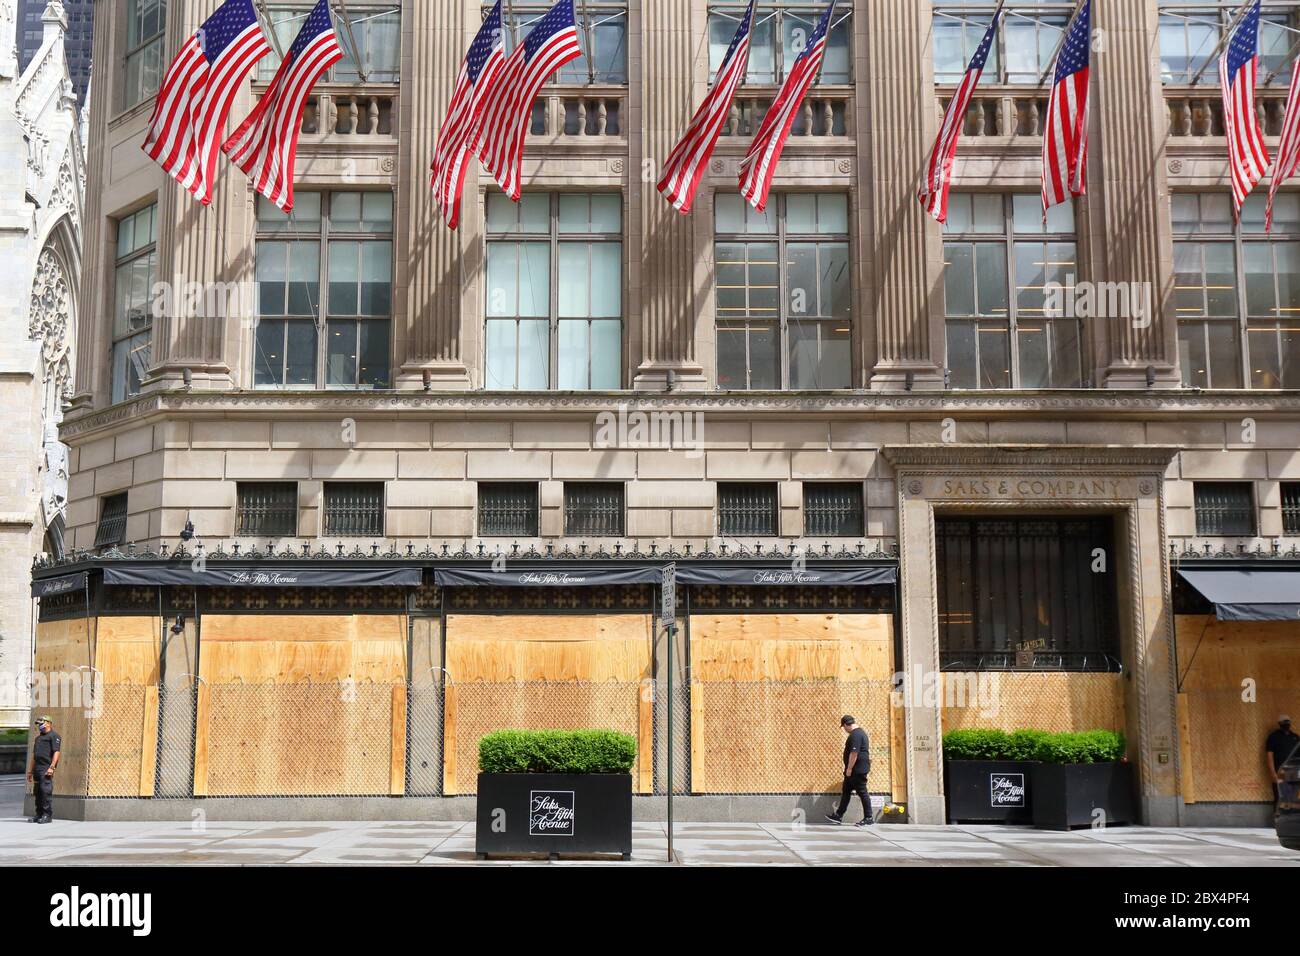 New York, NY. 3rd June 2020. The flagship Saks Fifth Avenue department store with boarded up windows, barbed wire, and American flags in response to a recent spate of large scale, organized burglaries/looting in various parts of the city. The barbed wire and private security appears to send an almost dystopian, and tone deaf message to the citizens of New York that all hope is lost.  On the flip side, it is an immensely Instagrammable photo op. The department store has been closed during the COVID-19 coronavirus pandemic. Stock Photo